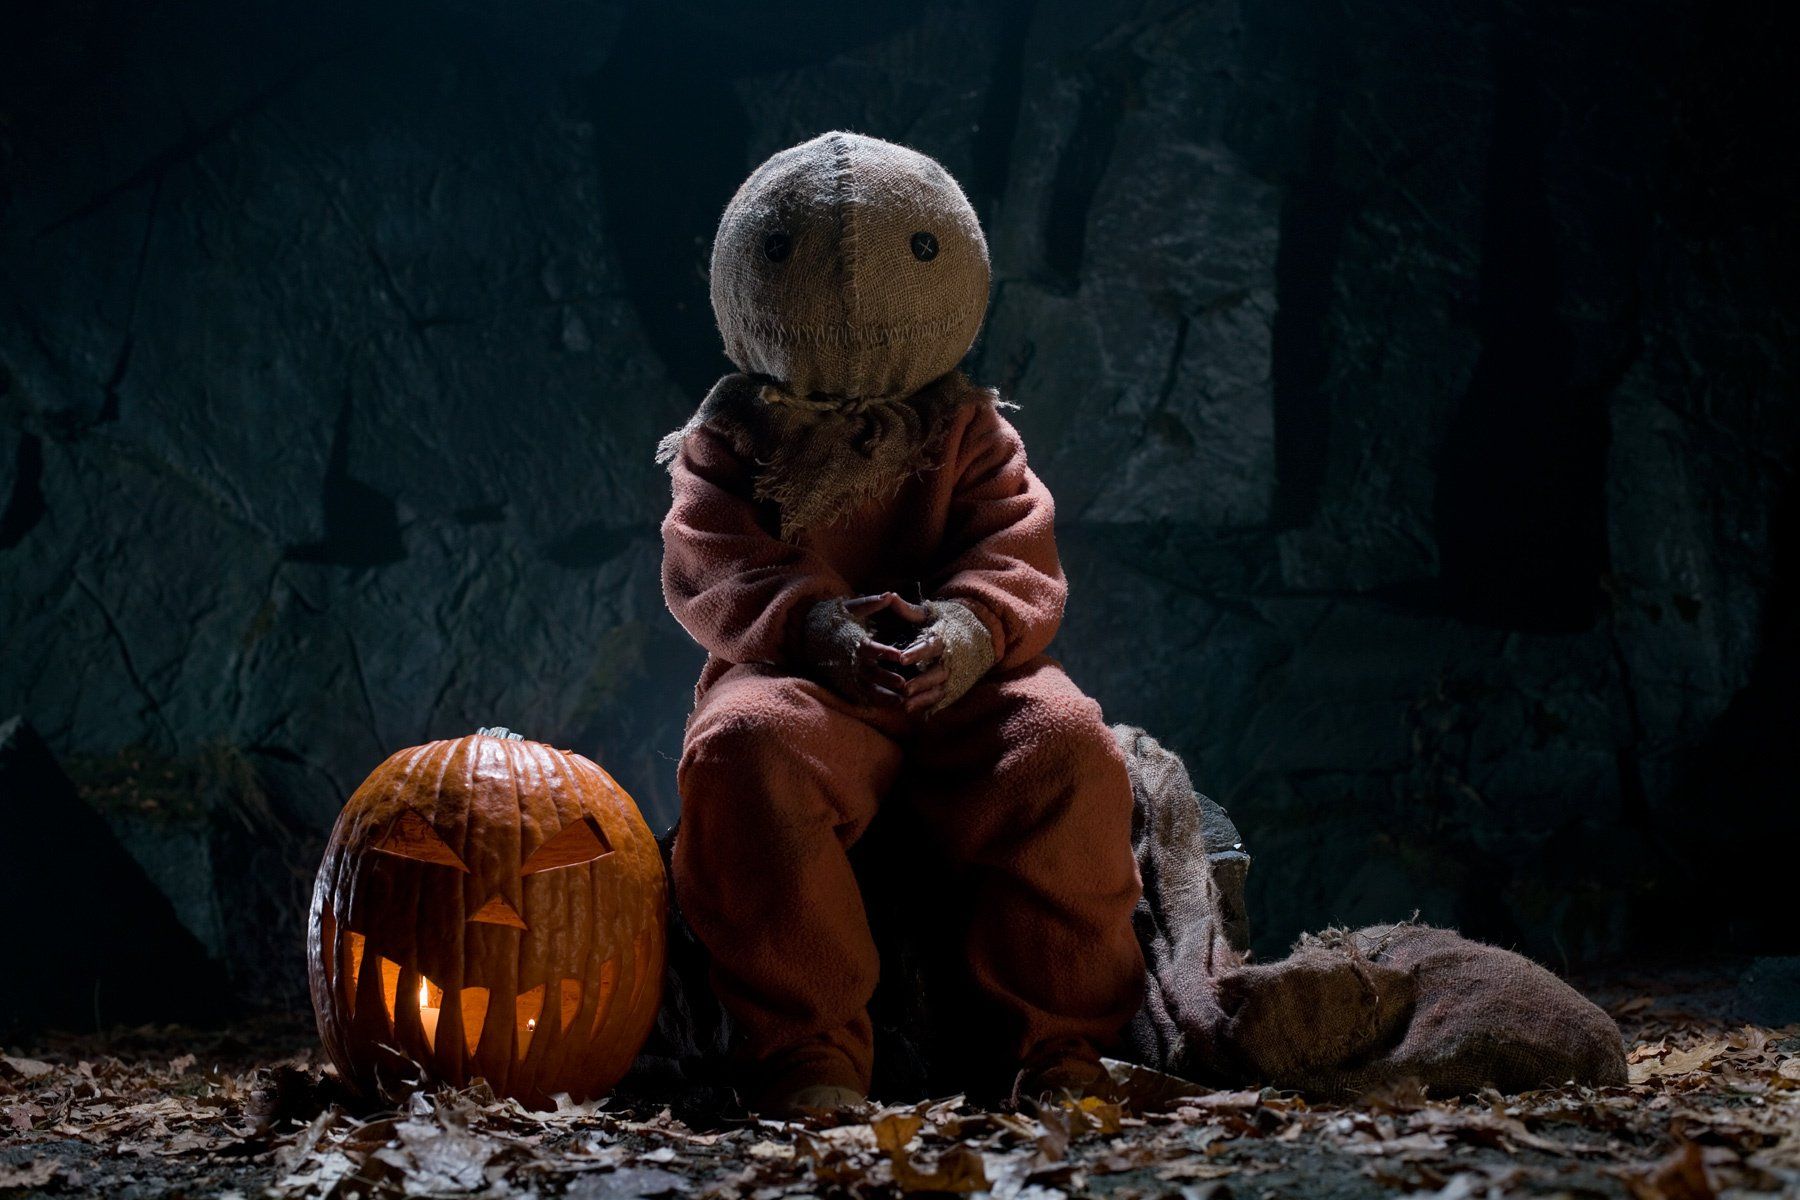 Trick 'r Treat Wallpapers